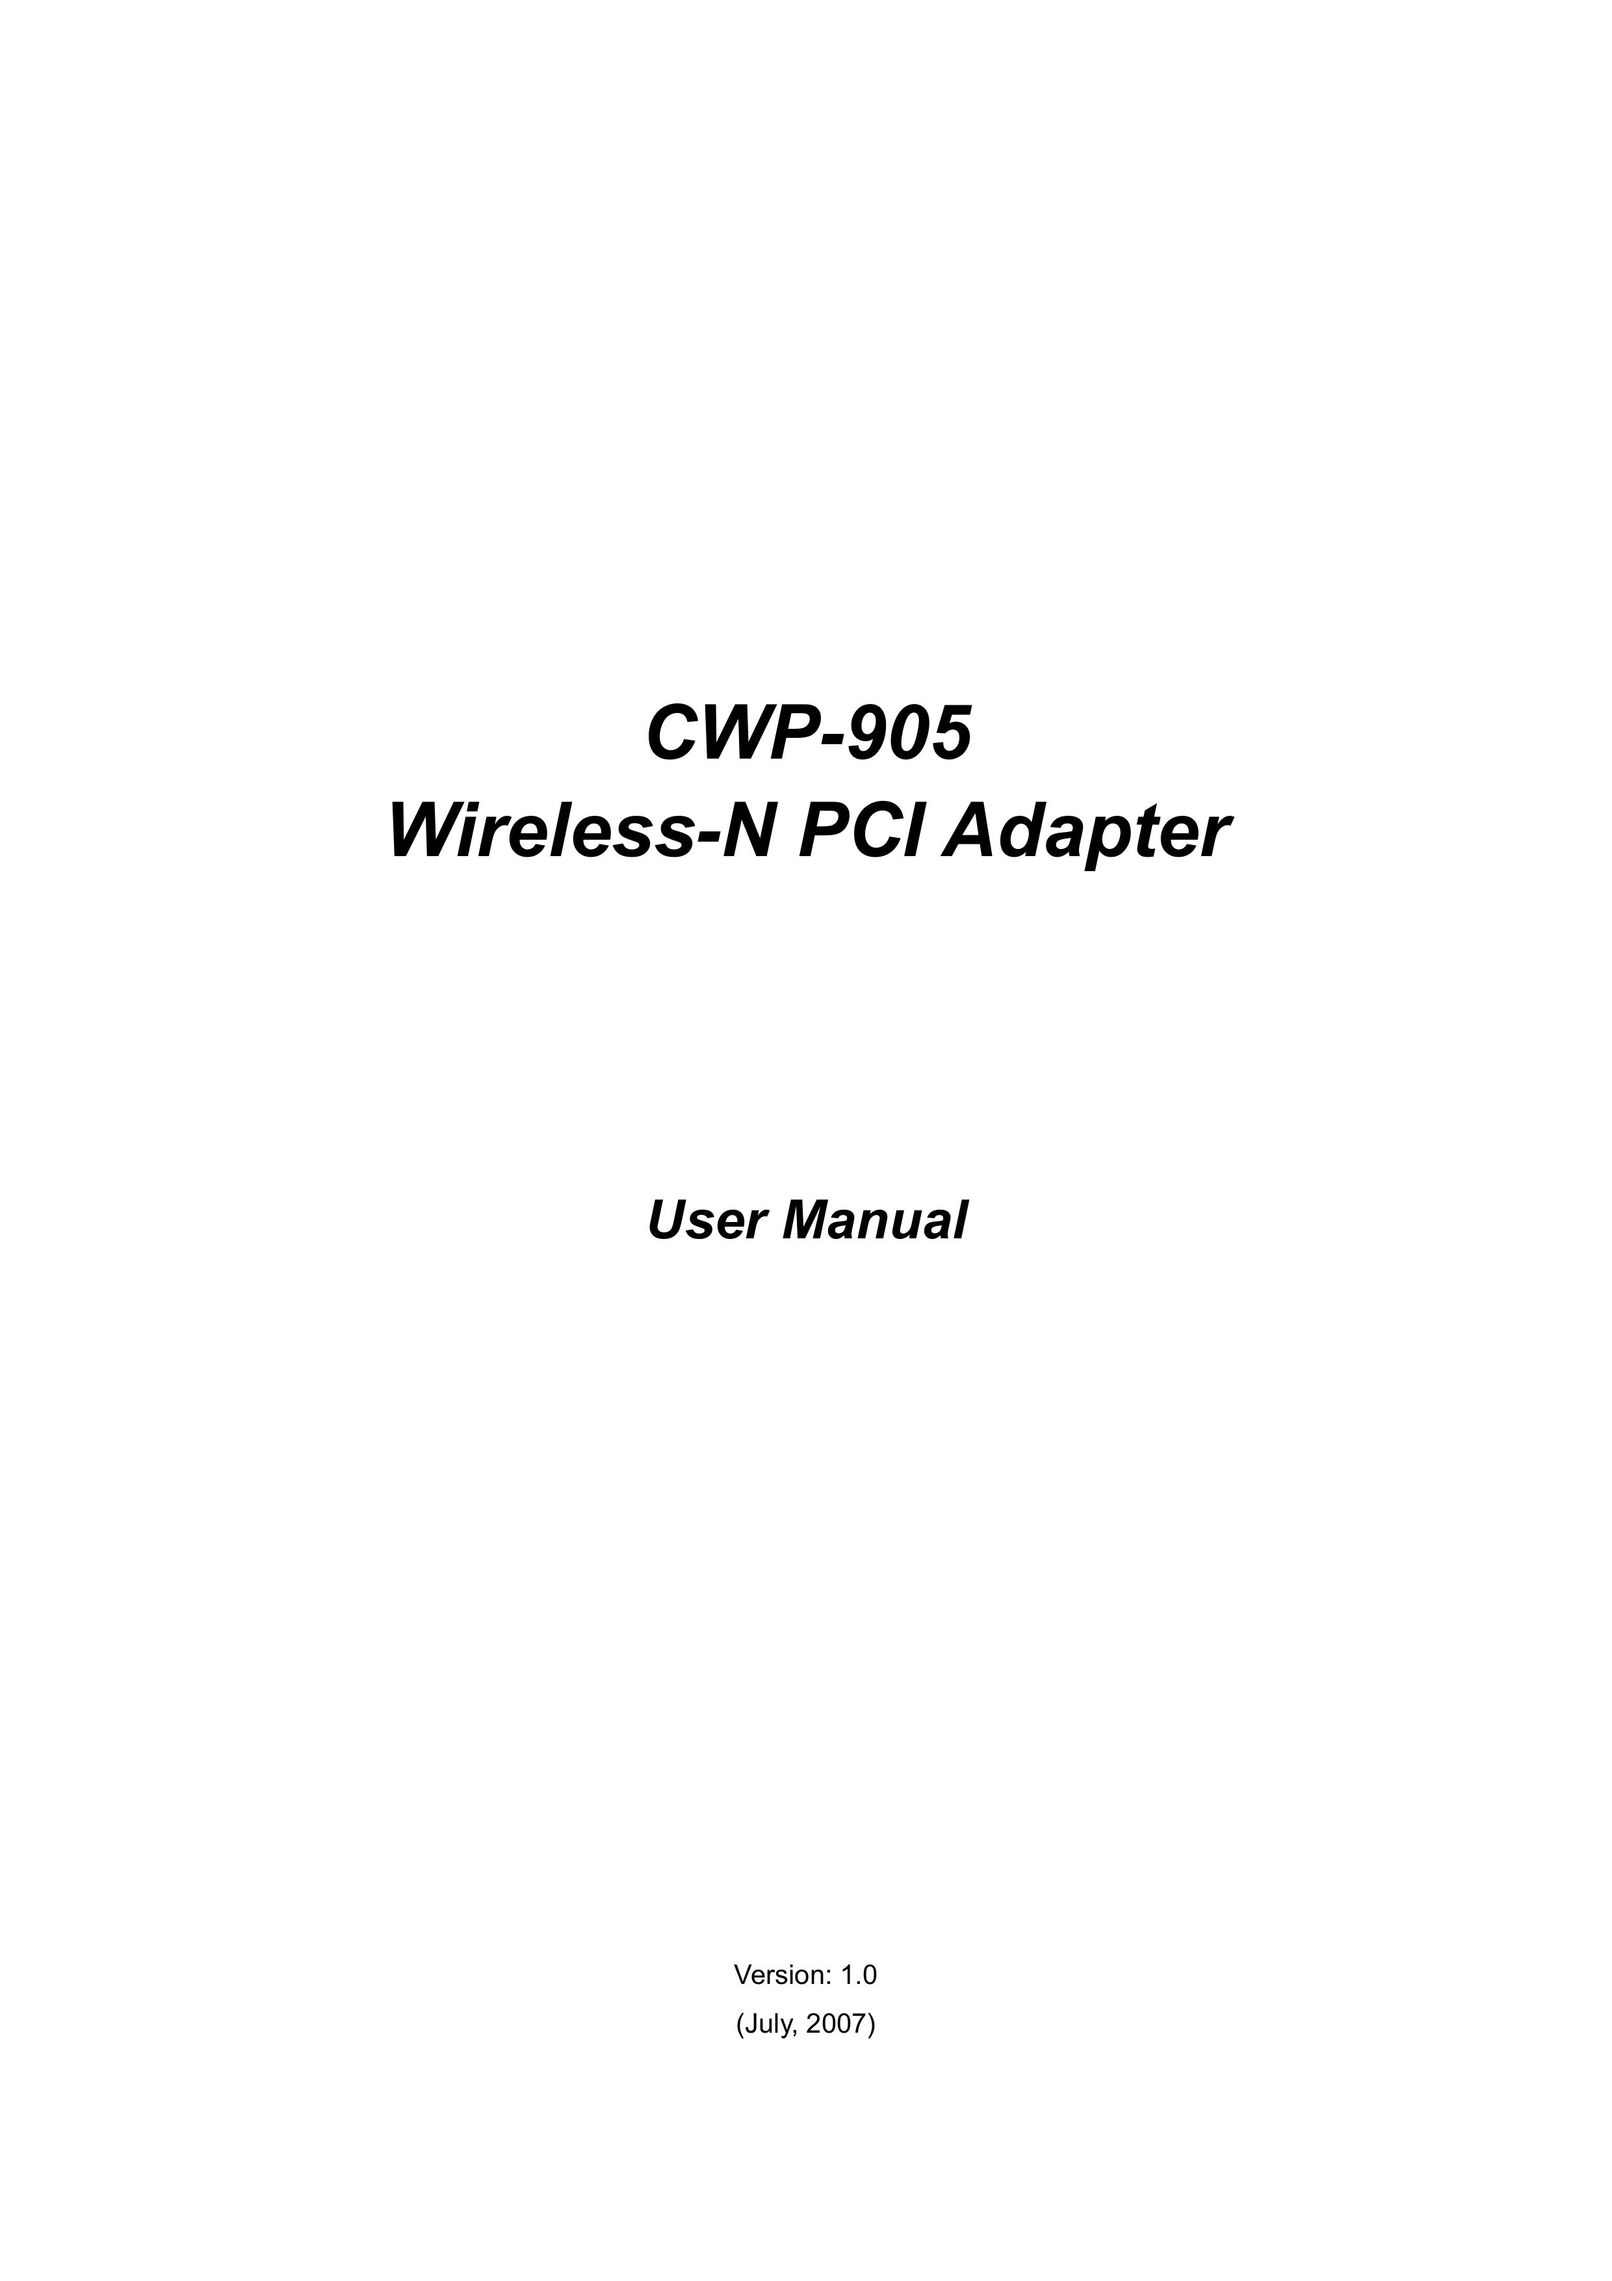 CNET CWP-905 Network Router User Manual